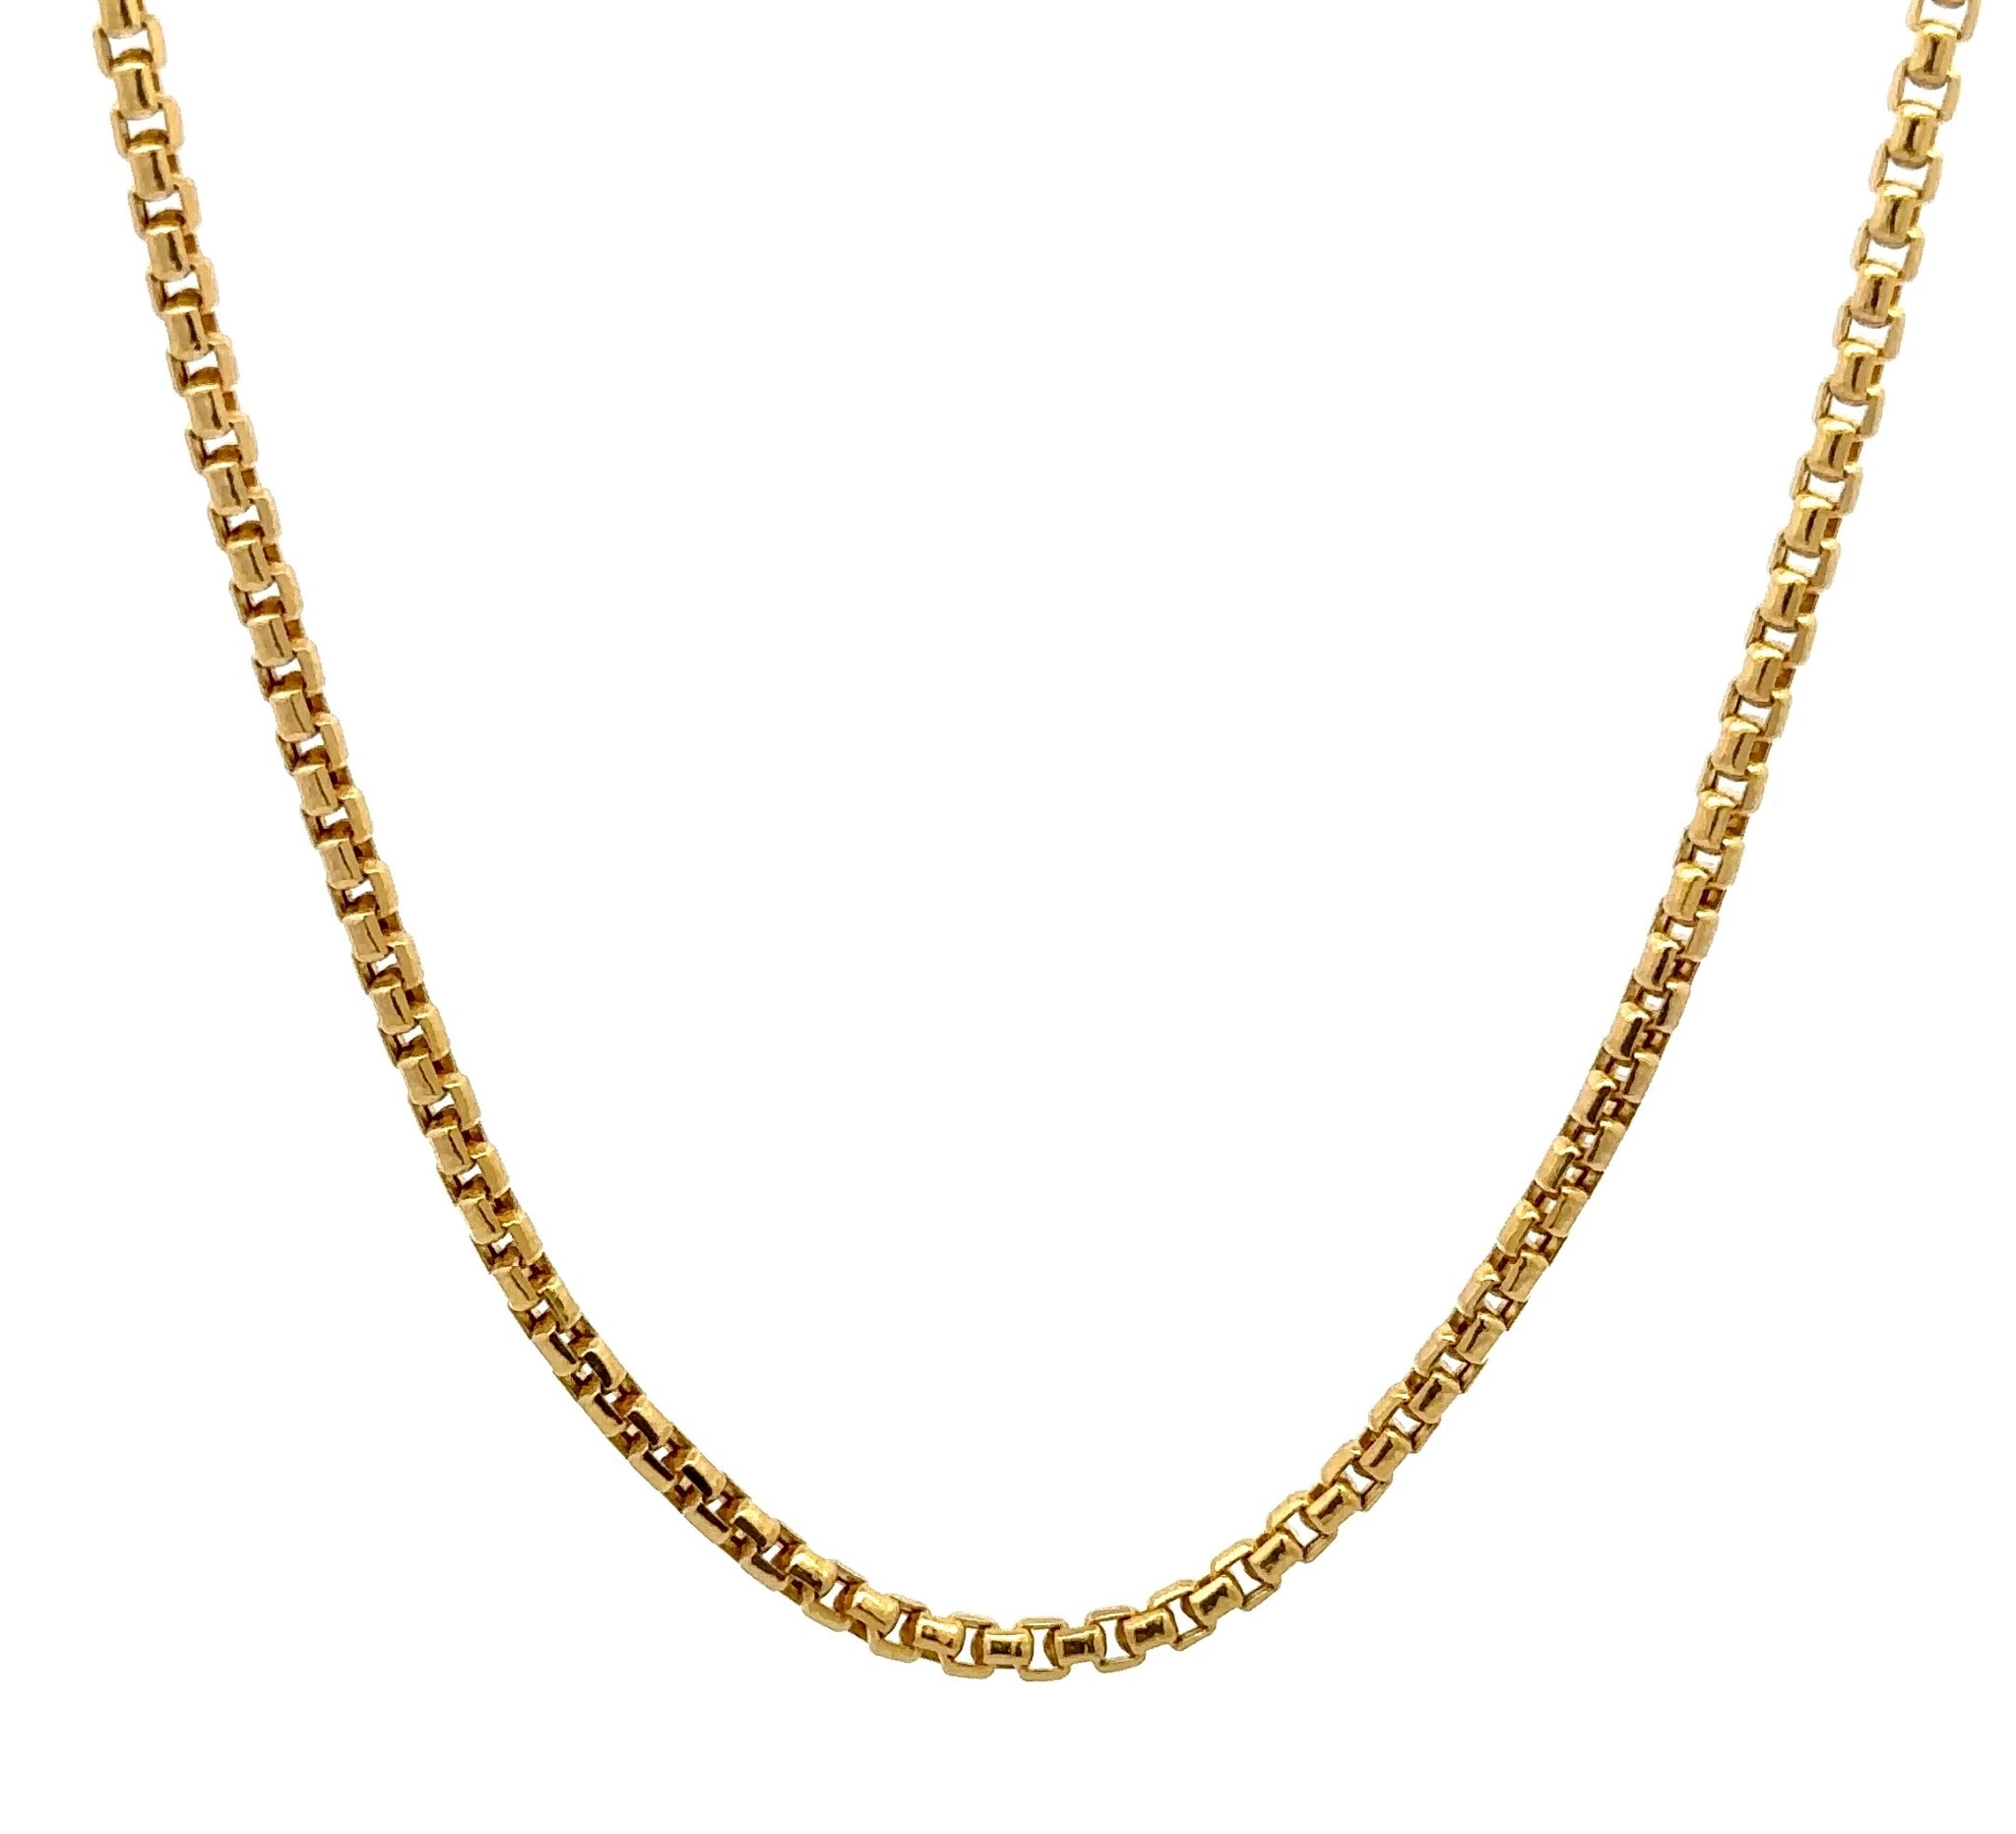 360 video of hanging yellow gold box style chain